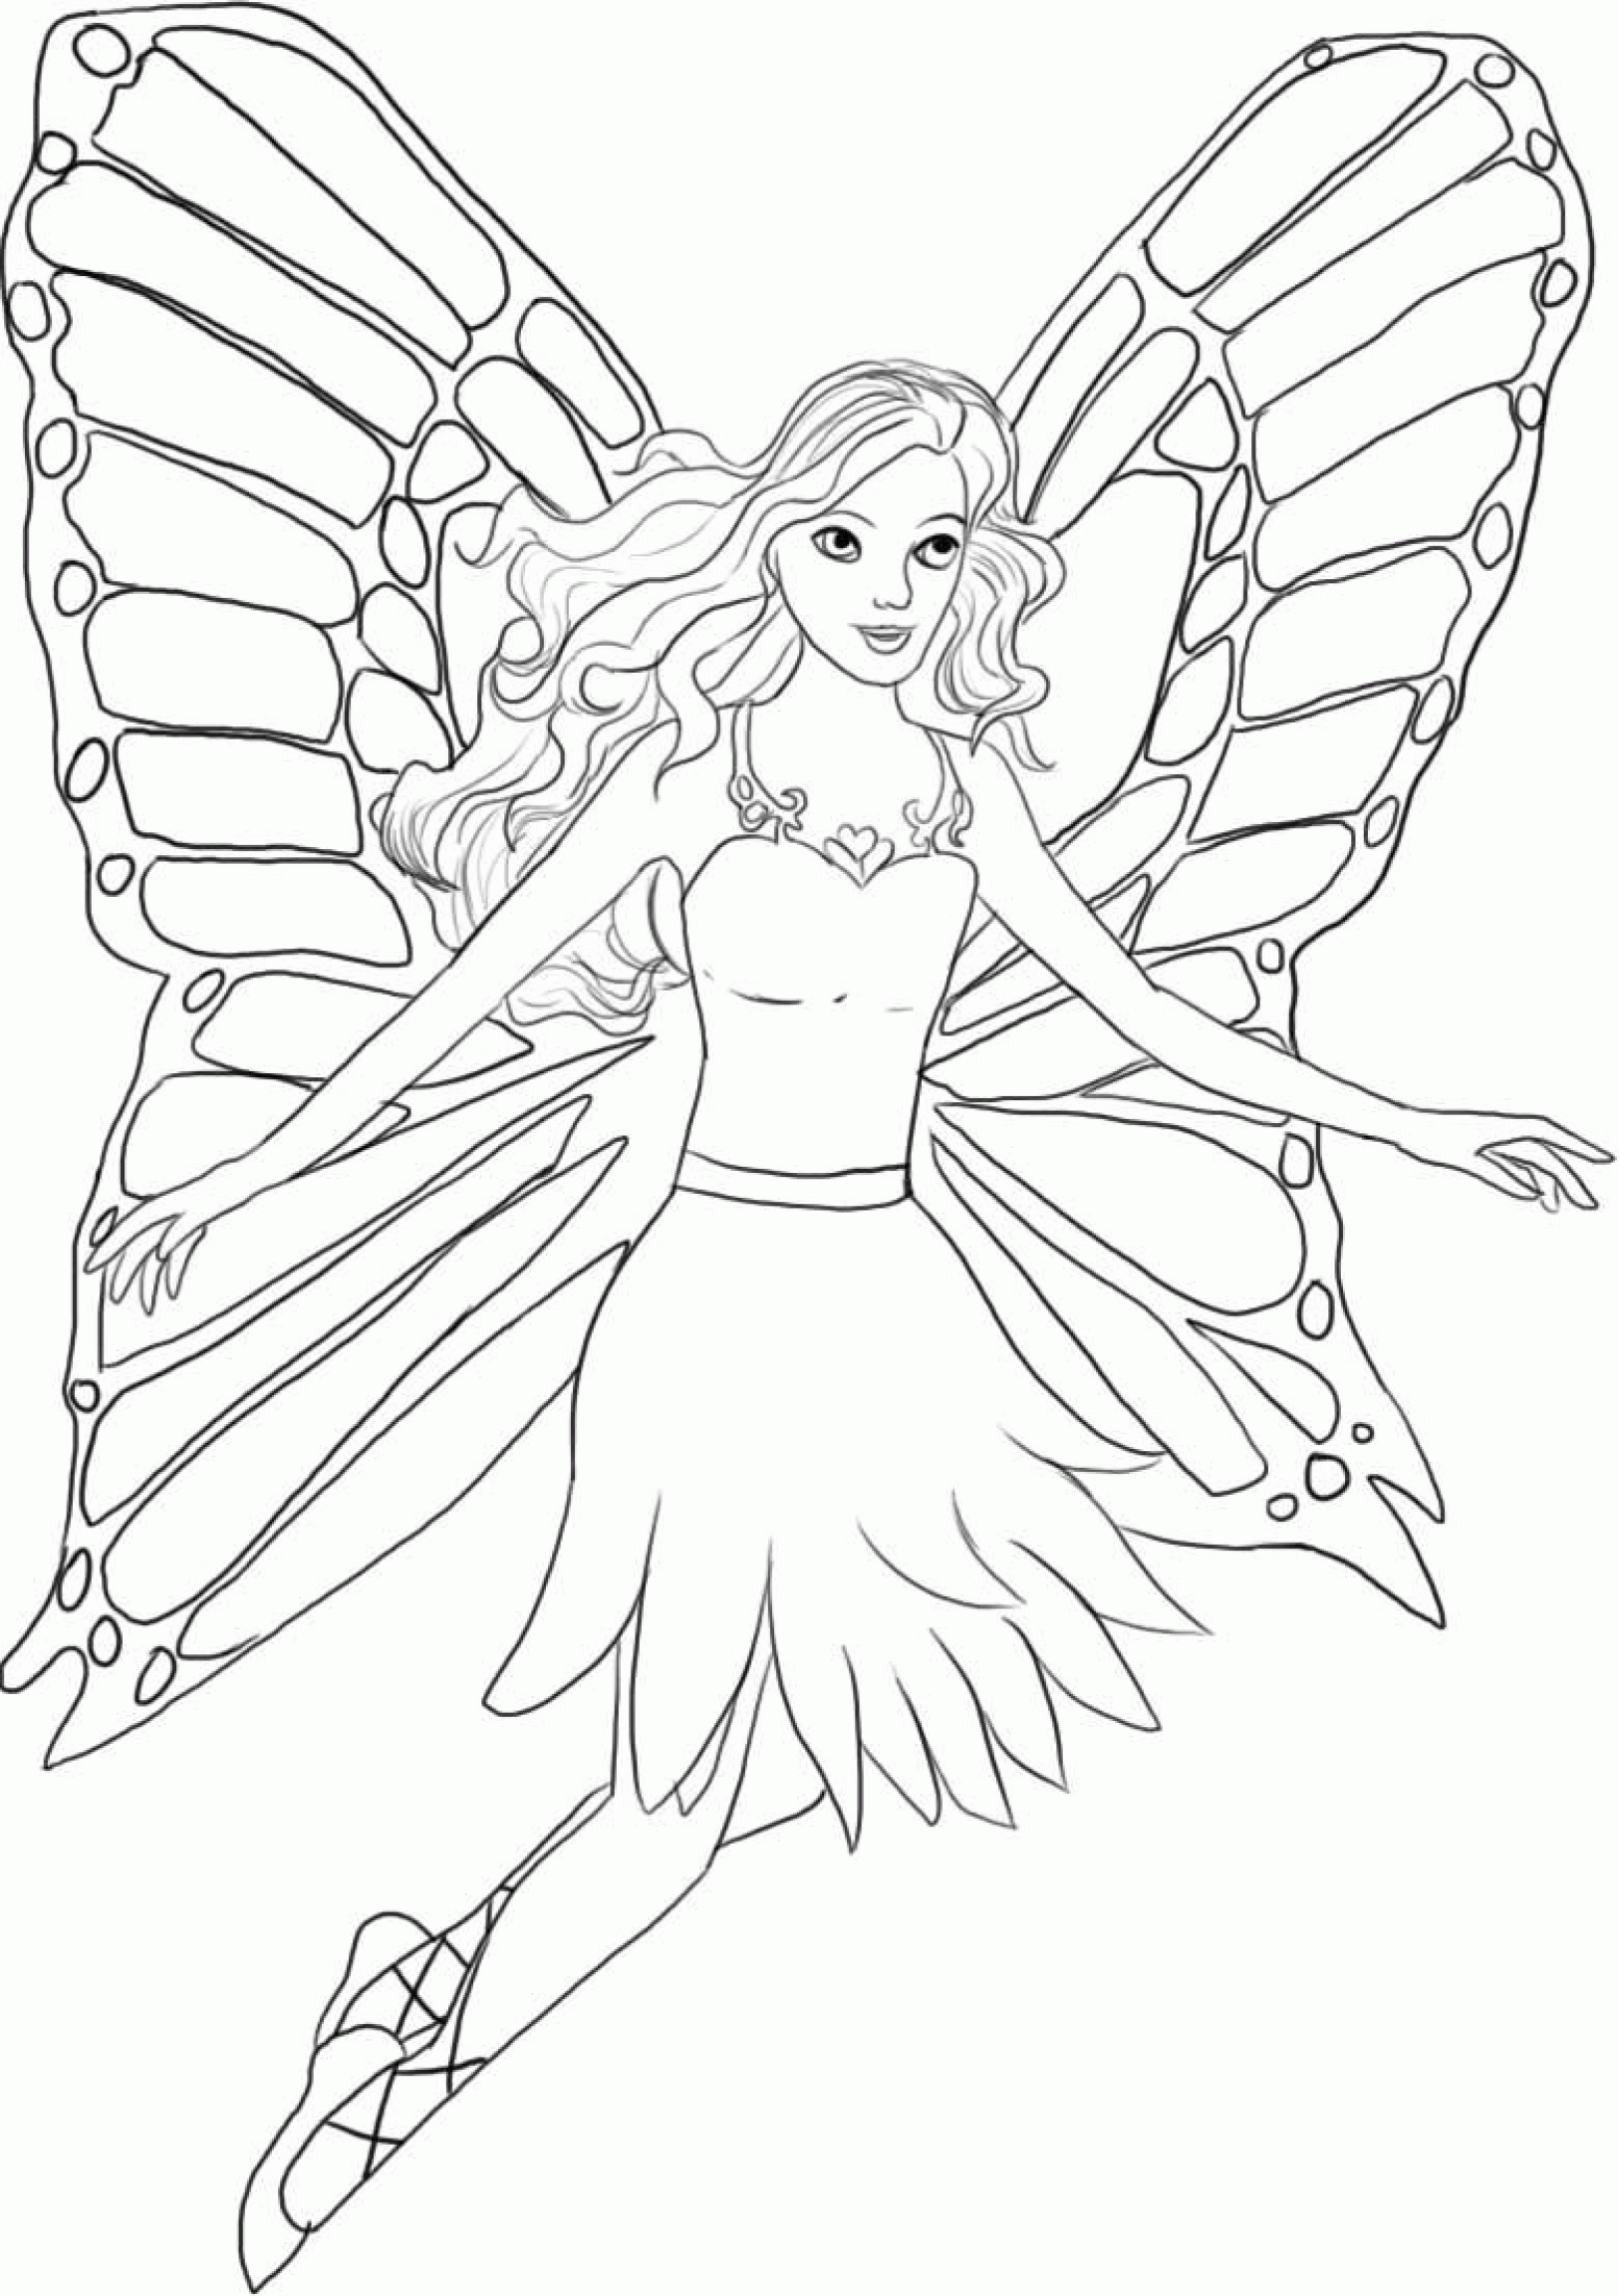 Coloring Page Fairy Princess - Coloring Home